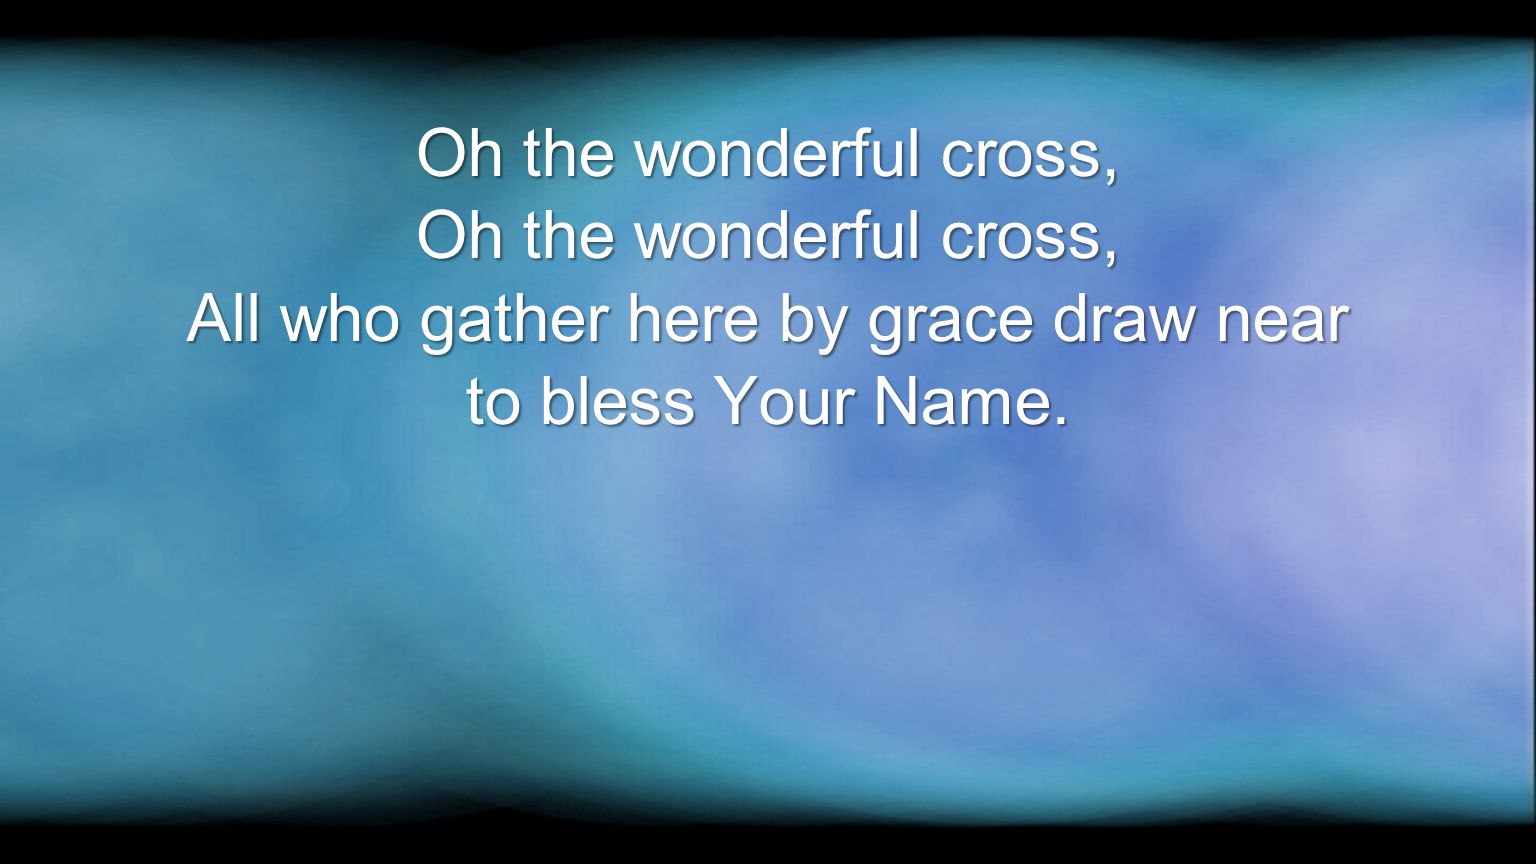 All who gather here by grace draw near